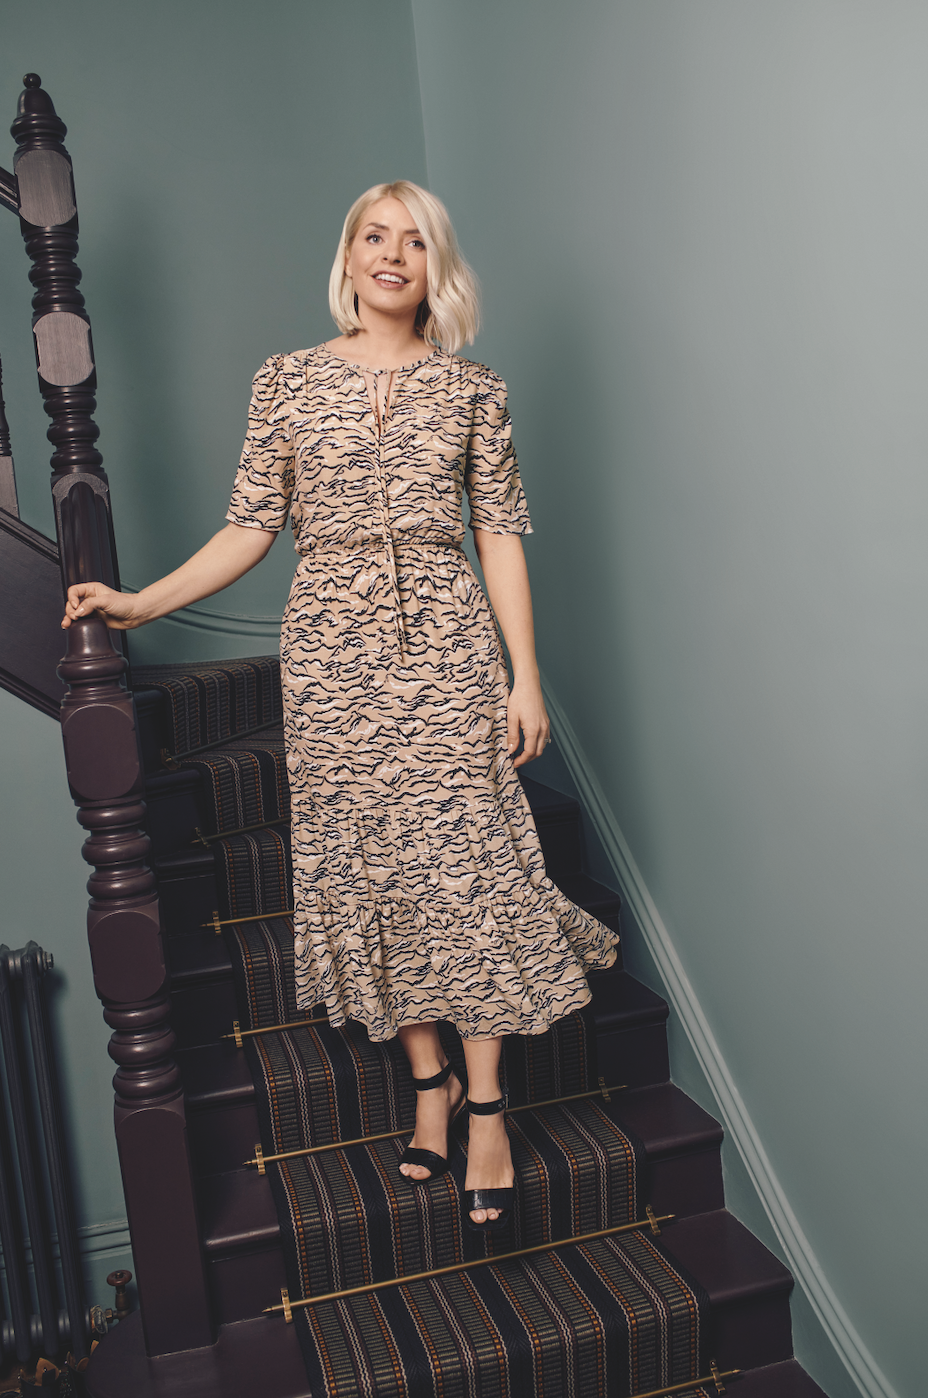 Holly's latest affordable M&S dress is sure to be a hit. (Marks & Spencer)